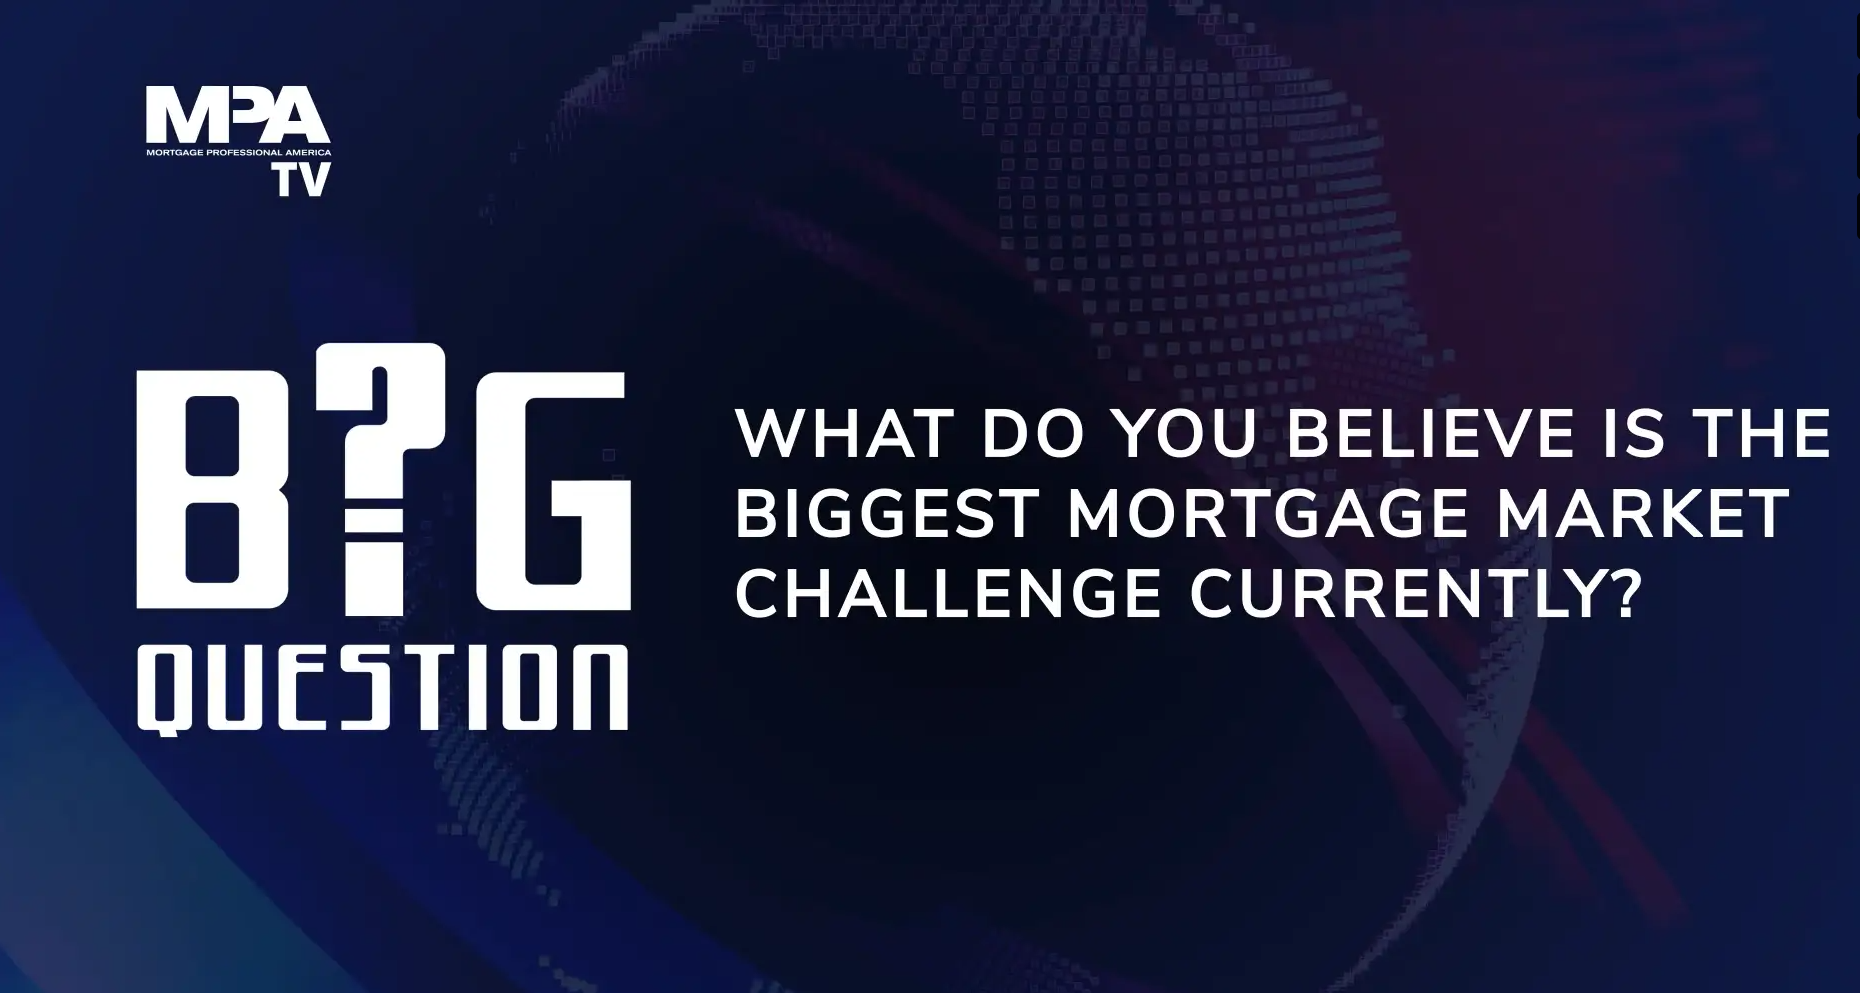 What is the biggest mortgage market challenge currently?